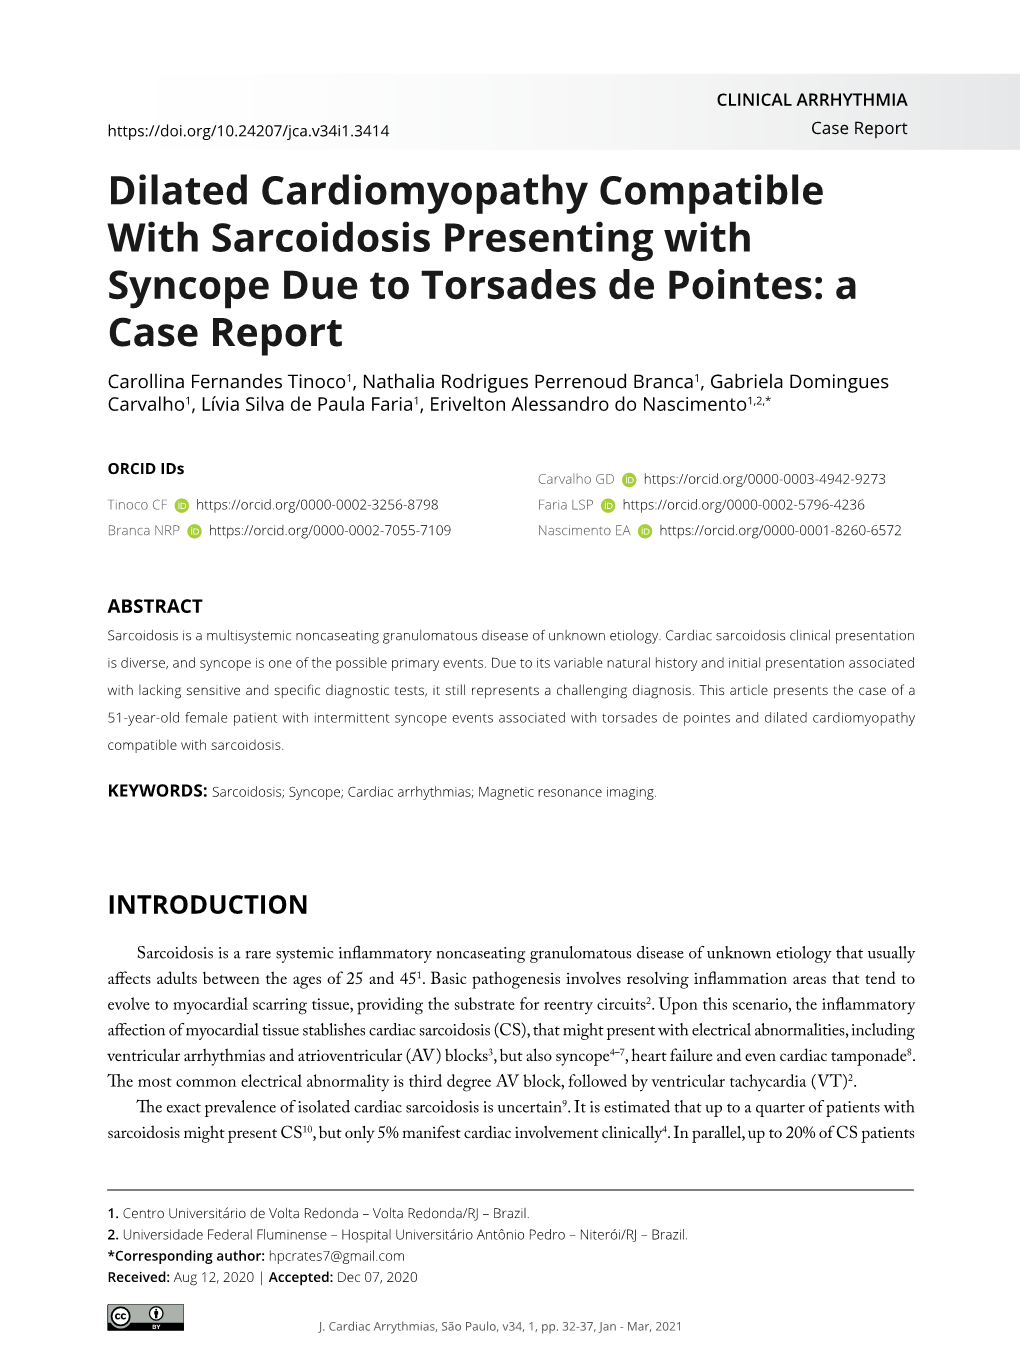 Dilated Cardiomyopathy Compatible with Sarcoidosis Presenting With